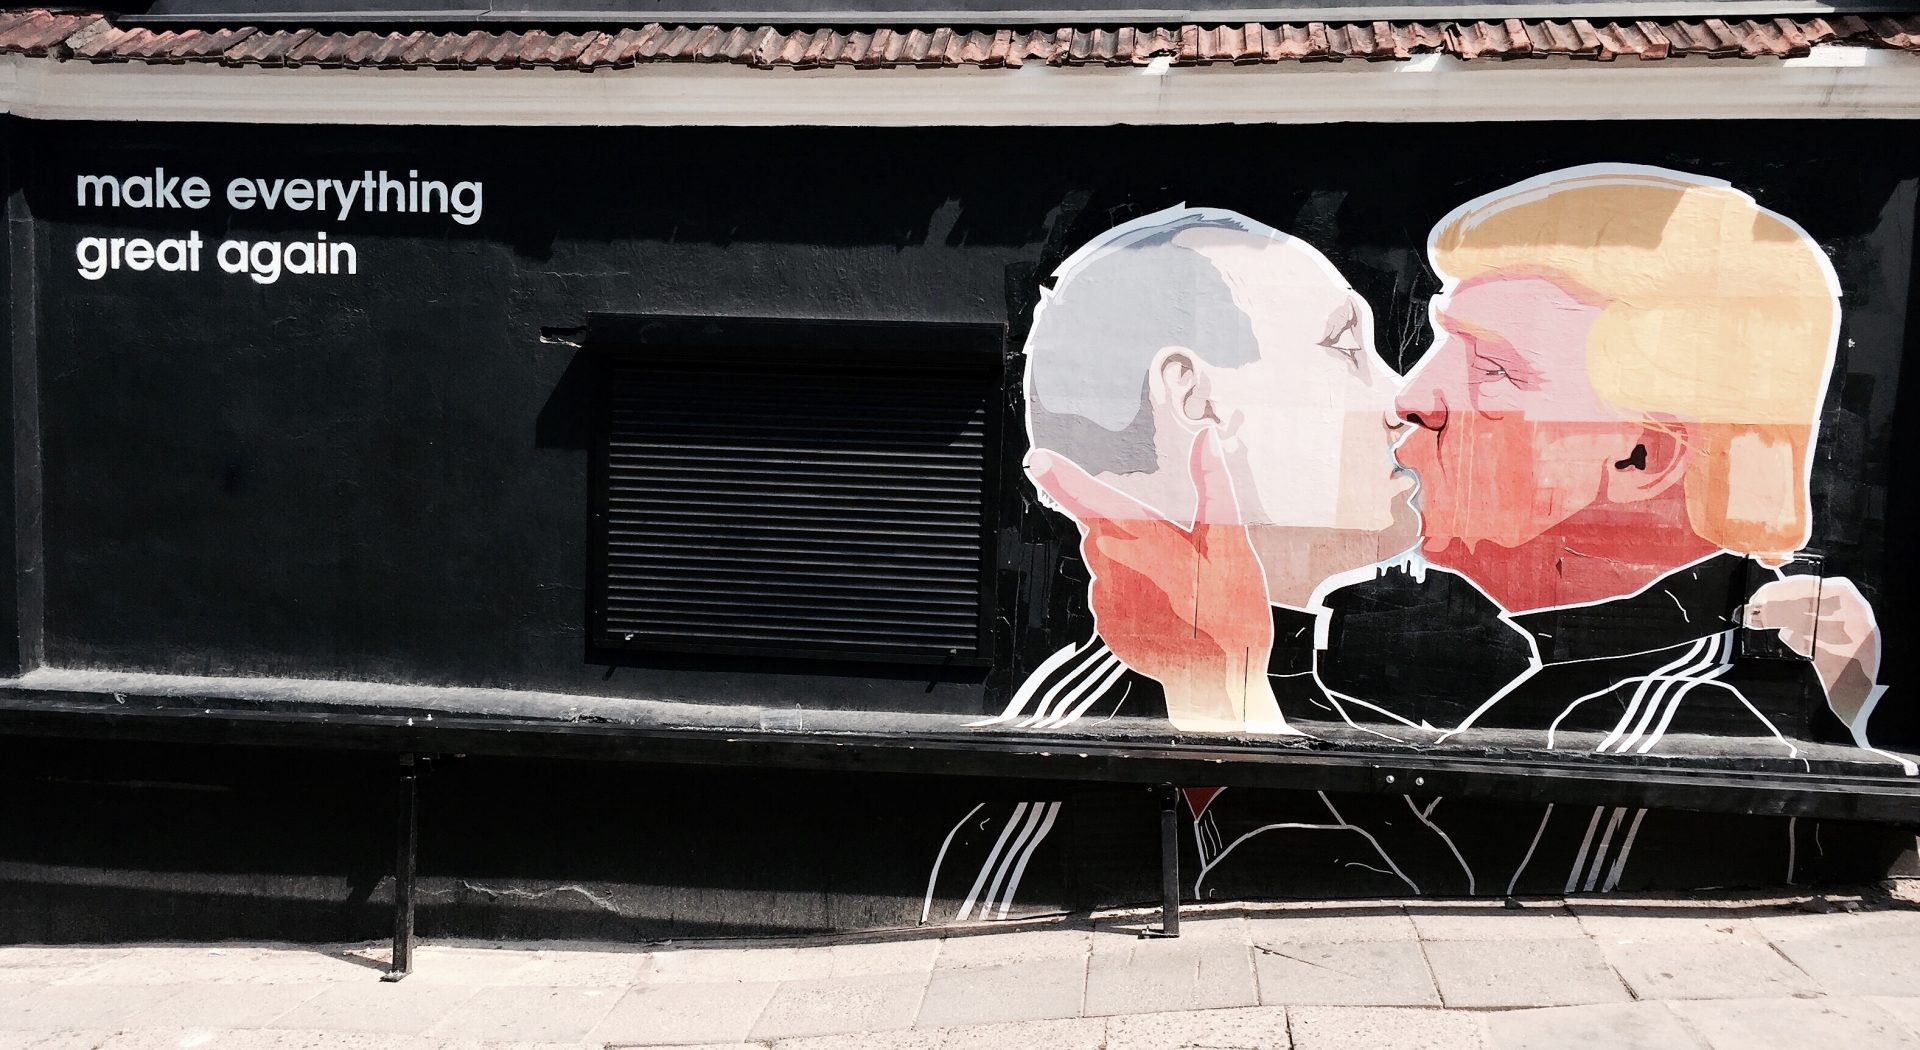 Donald Trump Make Everything Great Again Street art mural placed on the wall of a barbecue restaurant in the old town of Vilnius Lithuania done by the artists Dominykas Čečkauskas and Mindaugas Bonanu